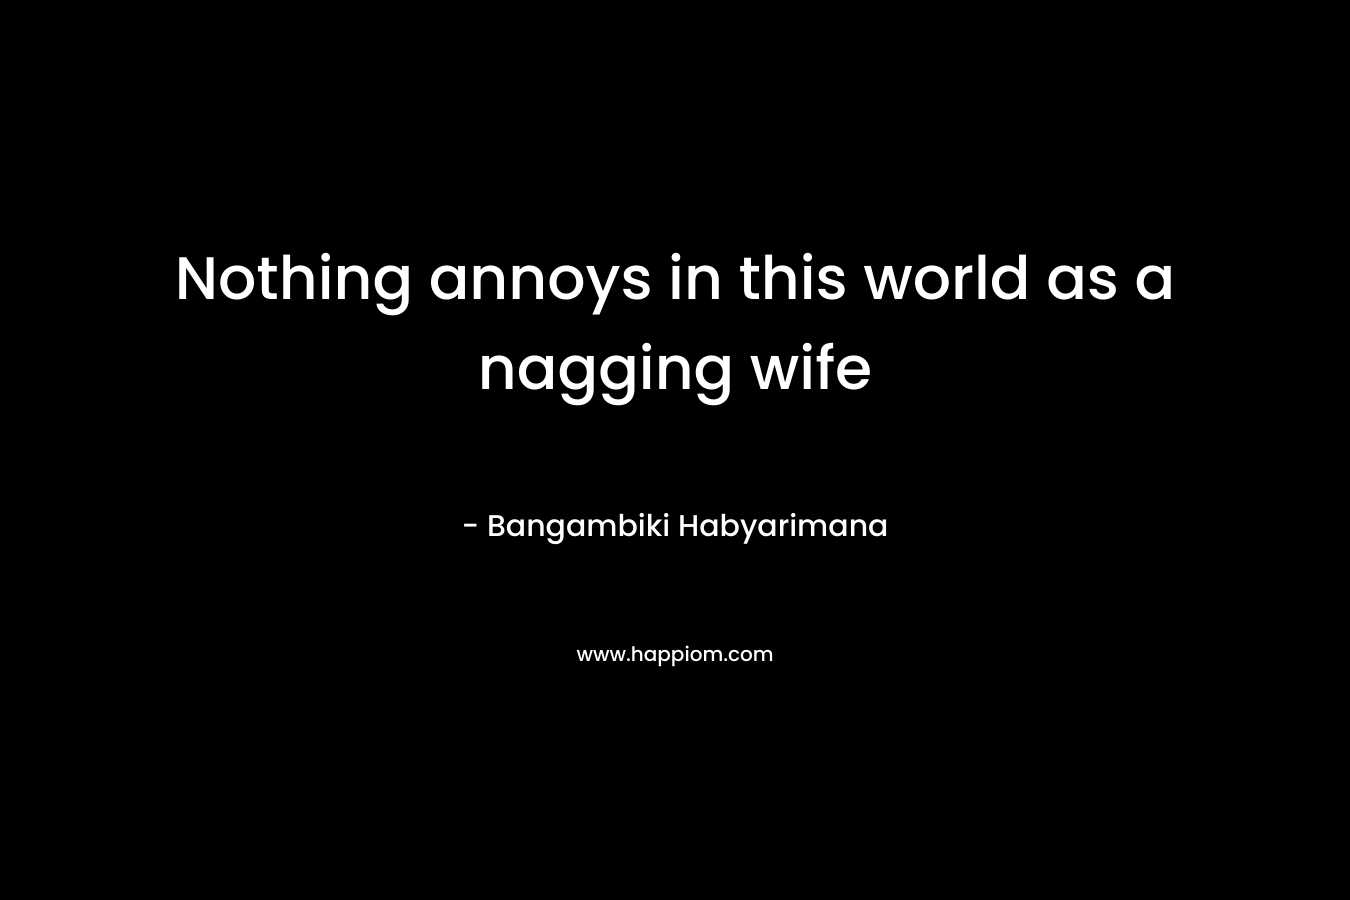 Nothing annoys in this world as a nagging wife